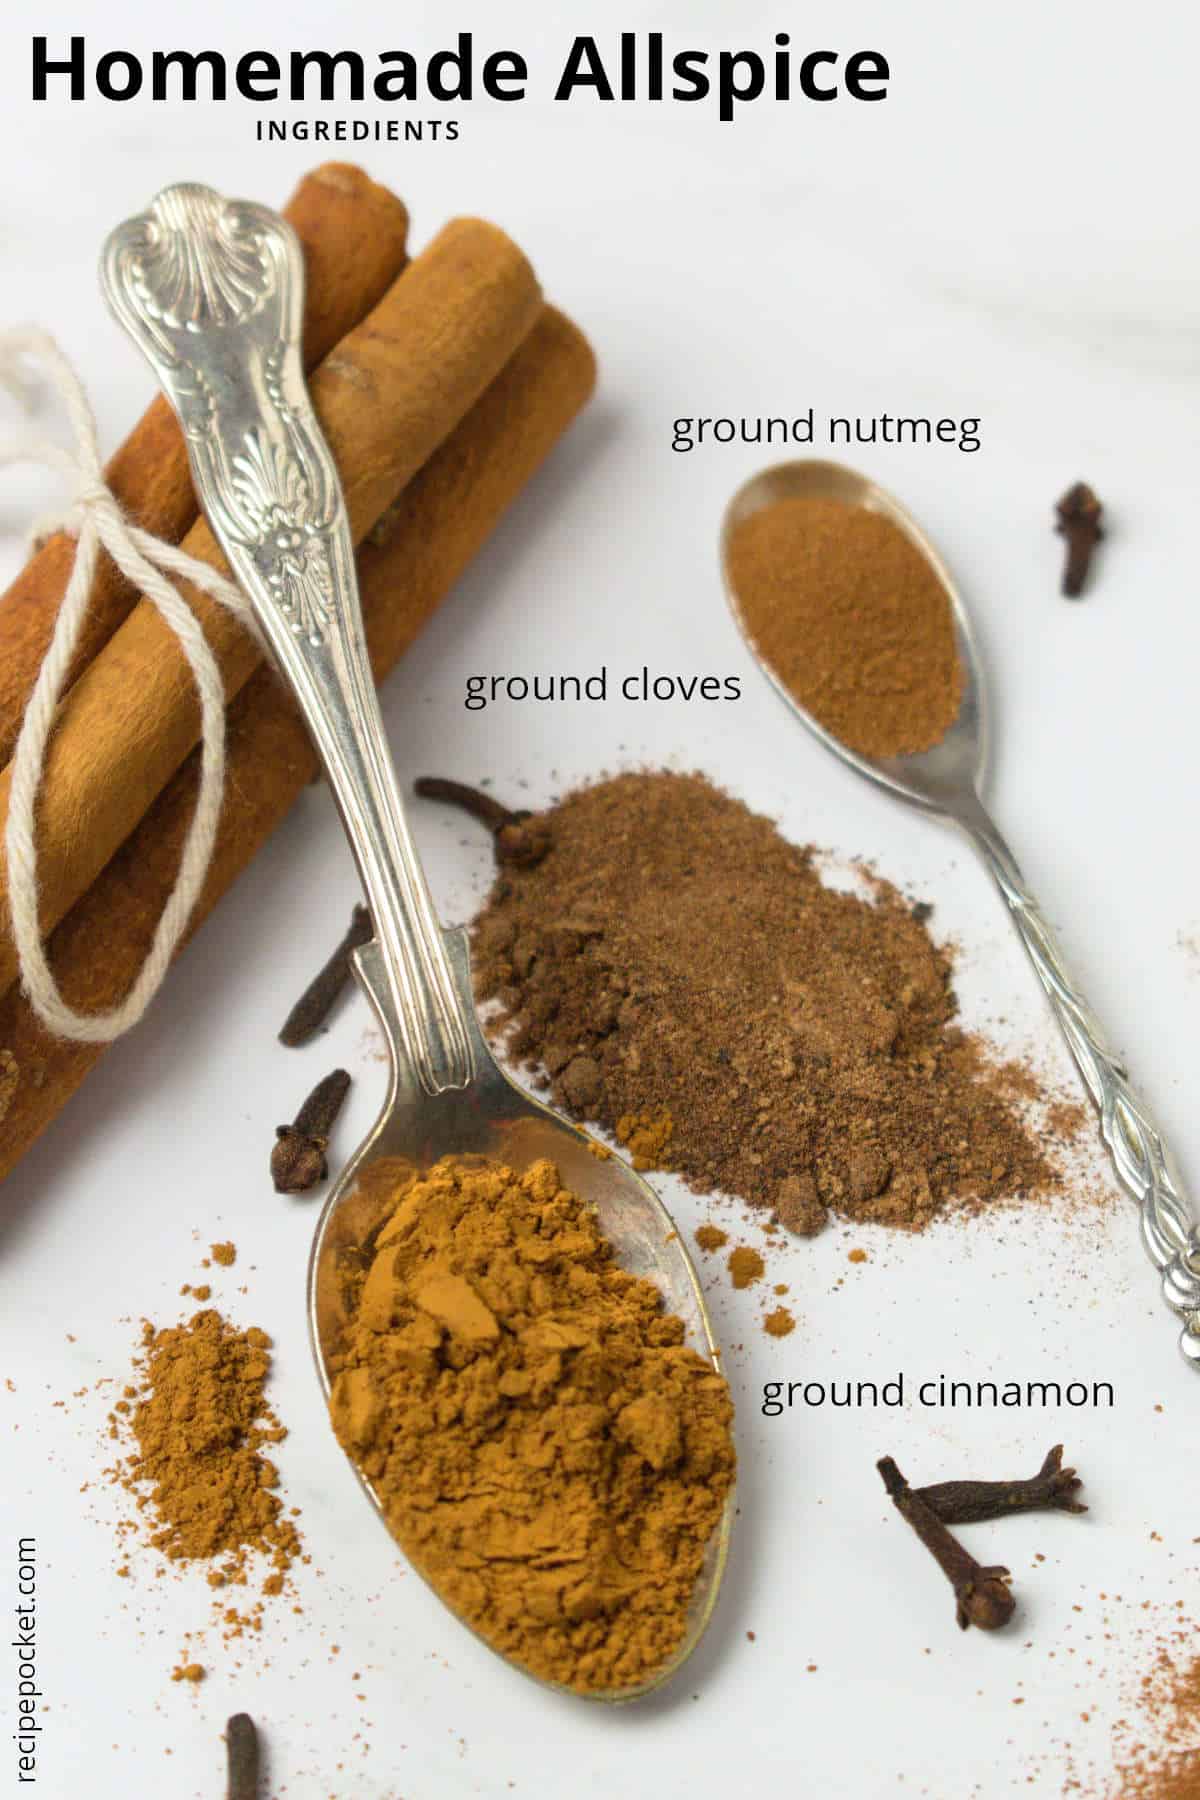 Ingredients for allspice recipe.